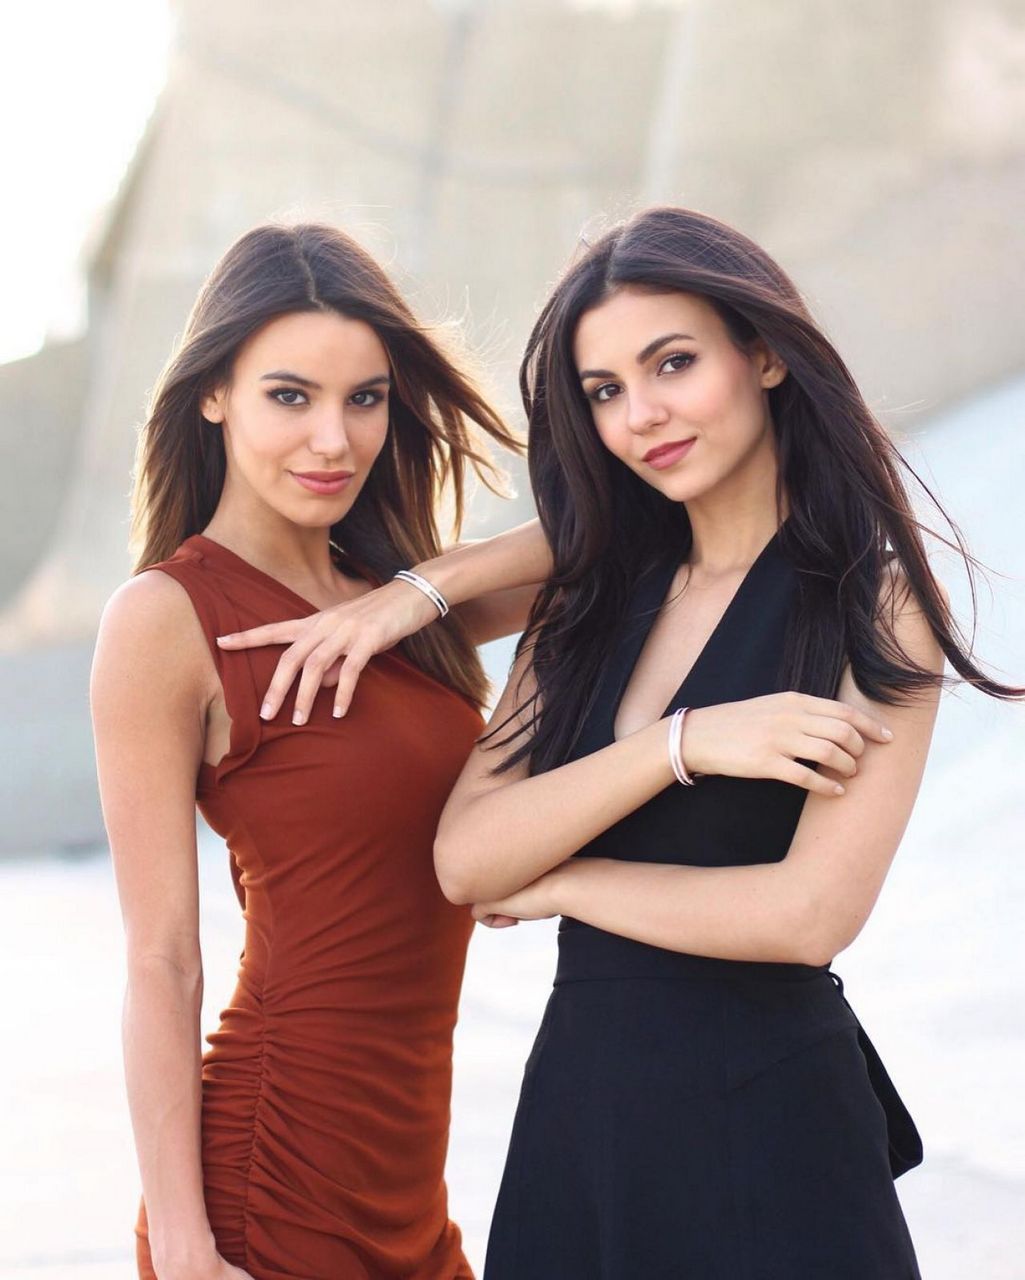 Madison Reed And Victoria Justice Hot